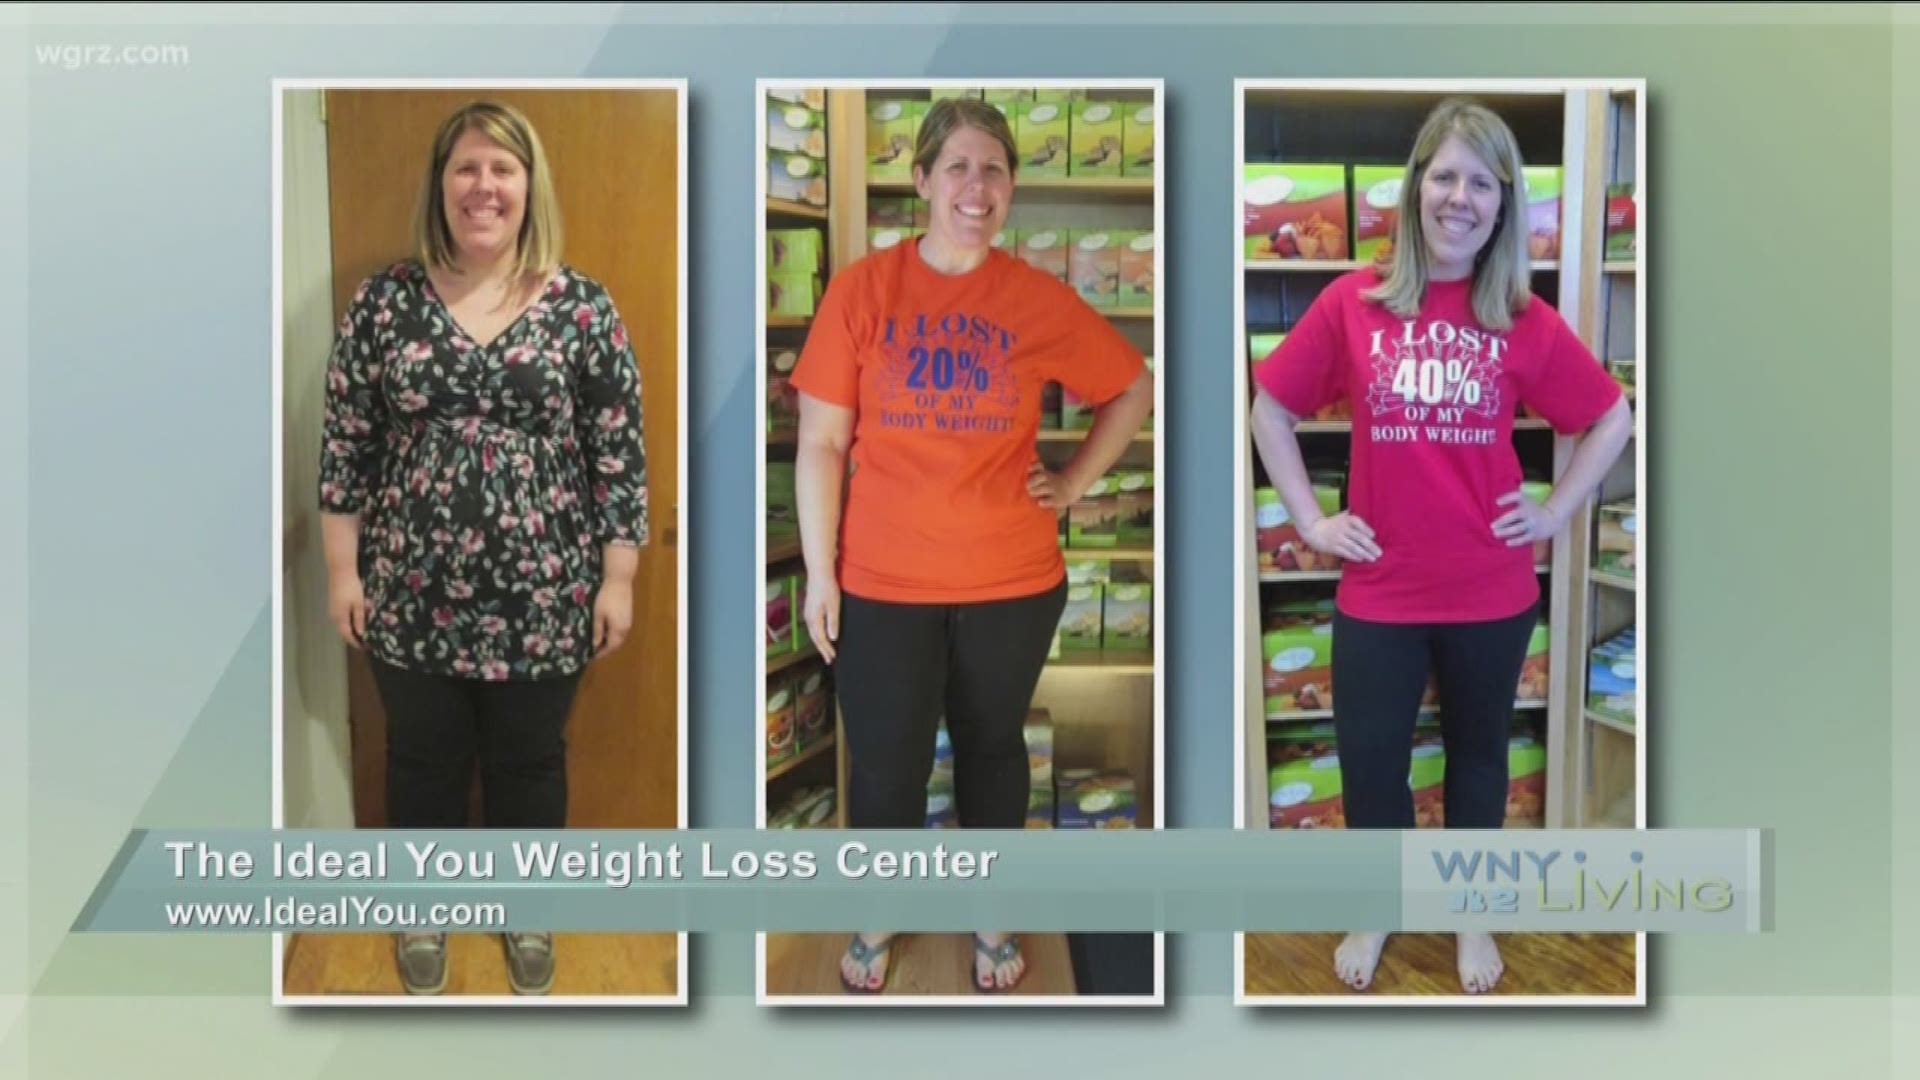 WNY Living - February 9 - The Ideal You Weight Loss Center